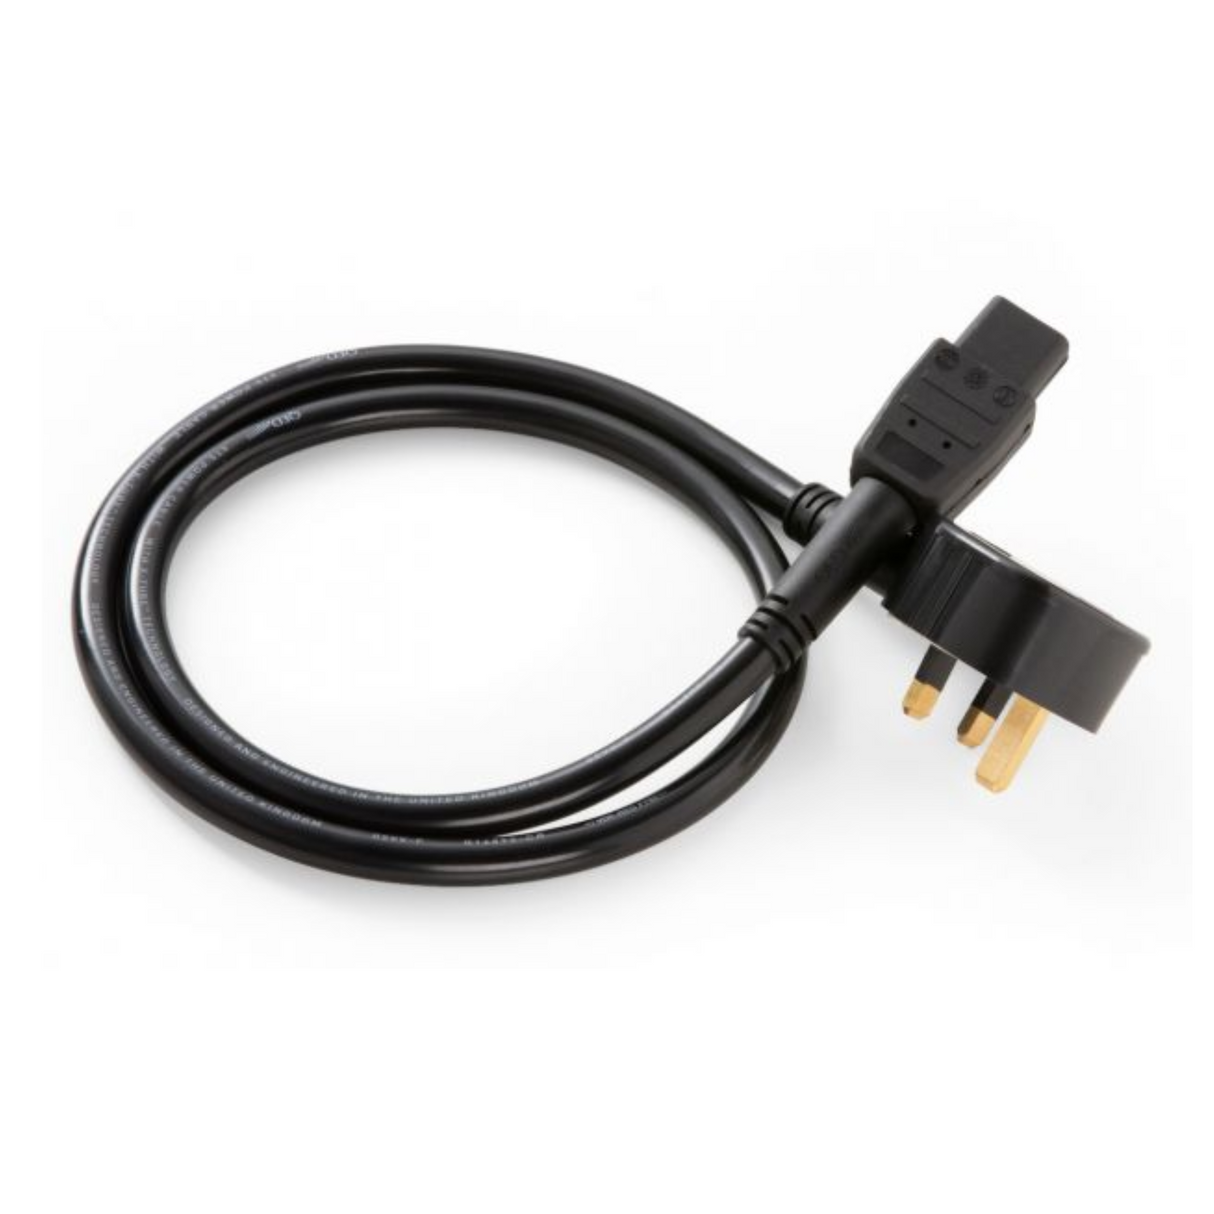 QED XT5 POWER CABLE 2M - QE4220